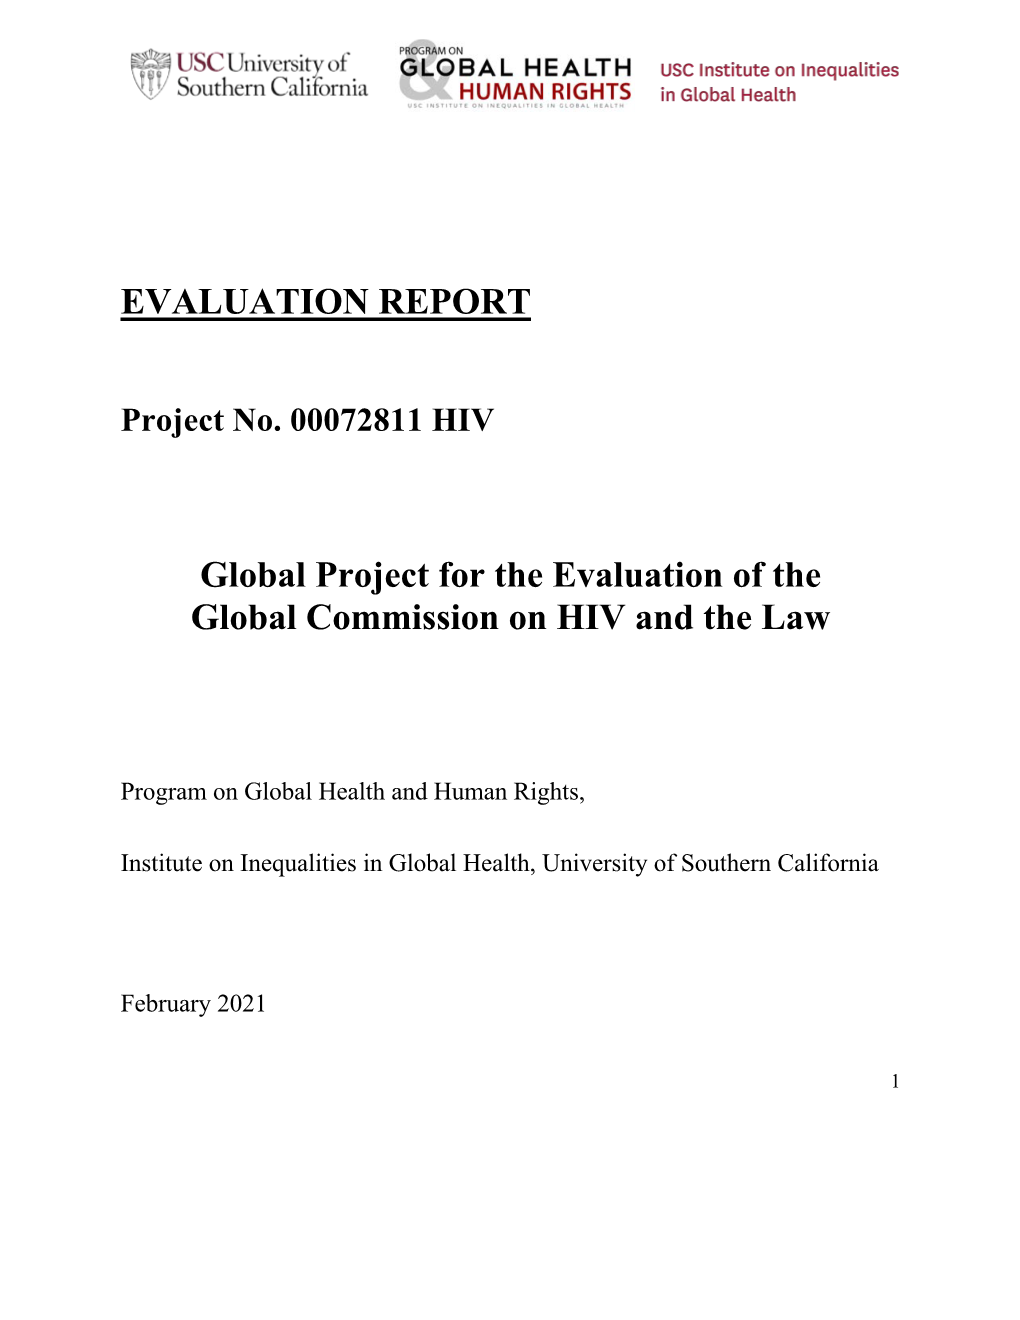 Final Report Independent Evaluation Global Commission HIV and The